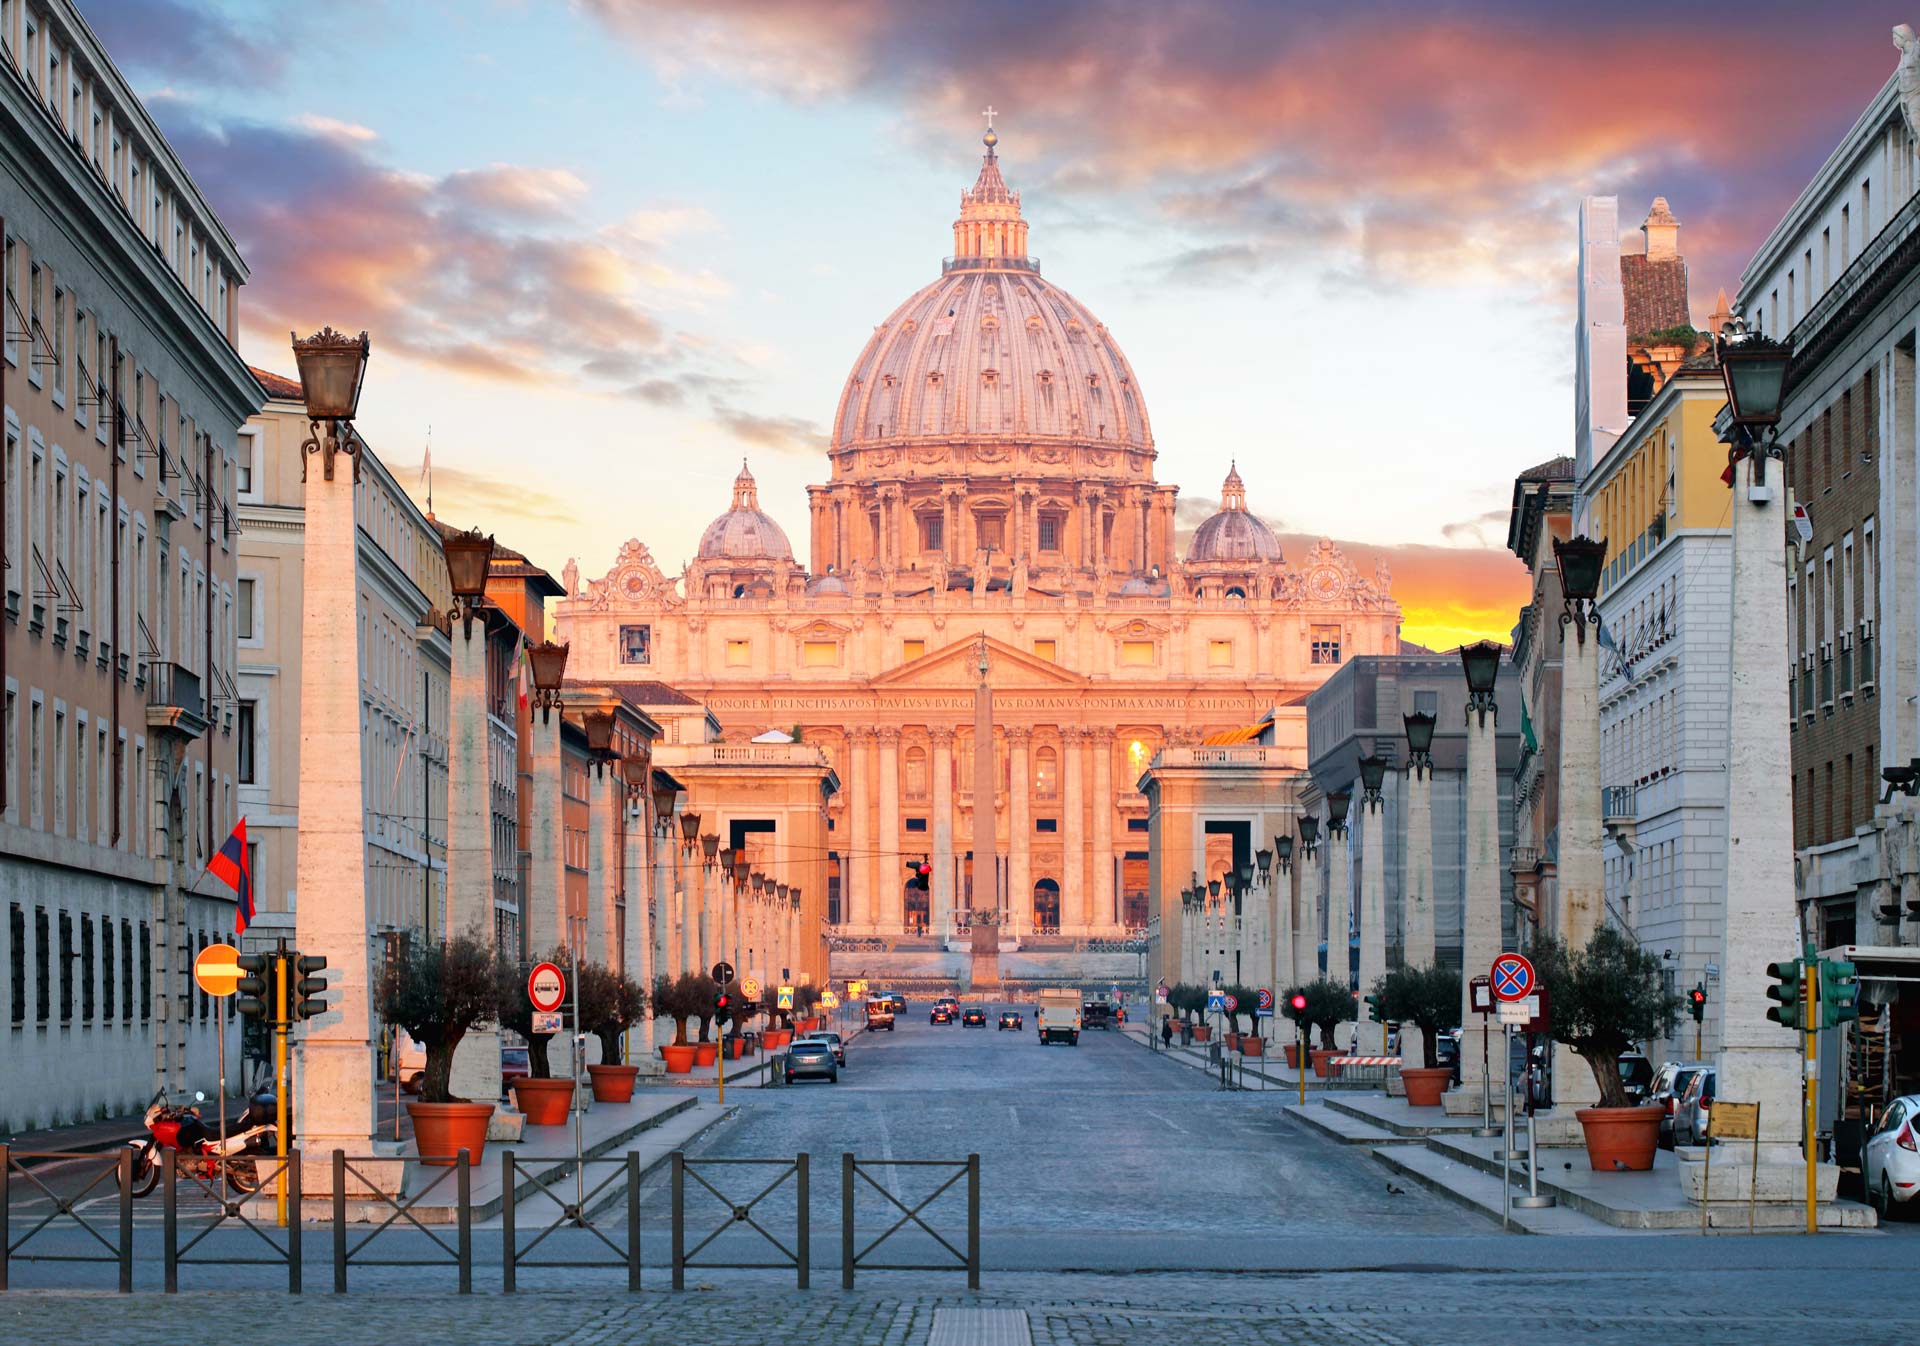 Early Access VIP Small Group Tour: Vatican Museums, Sistine Chapel and